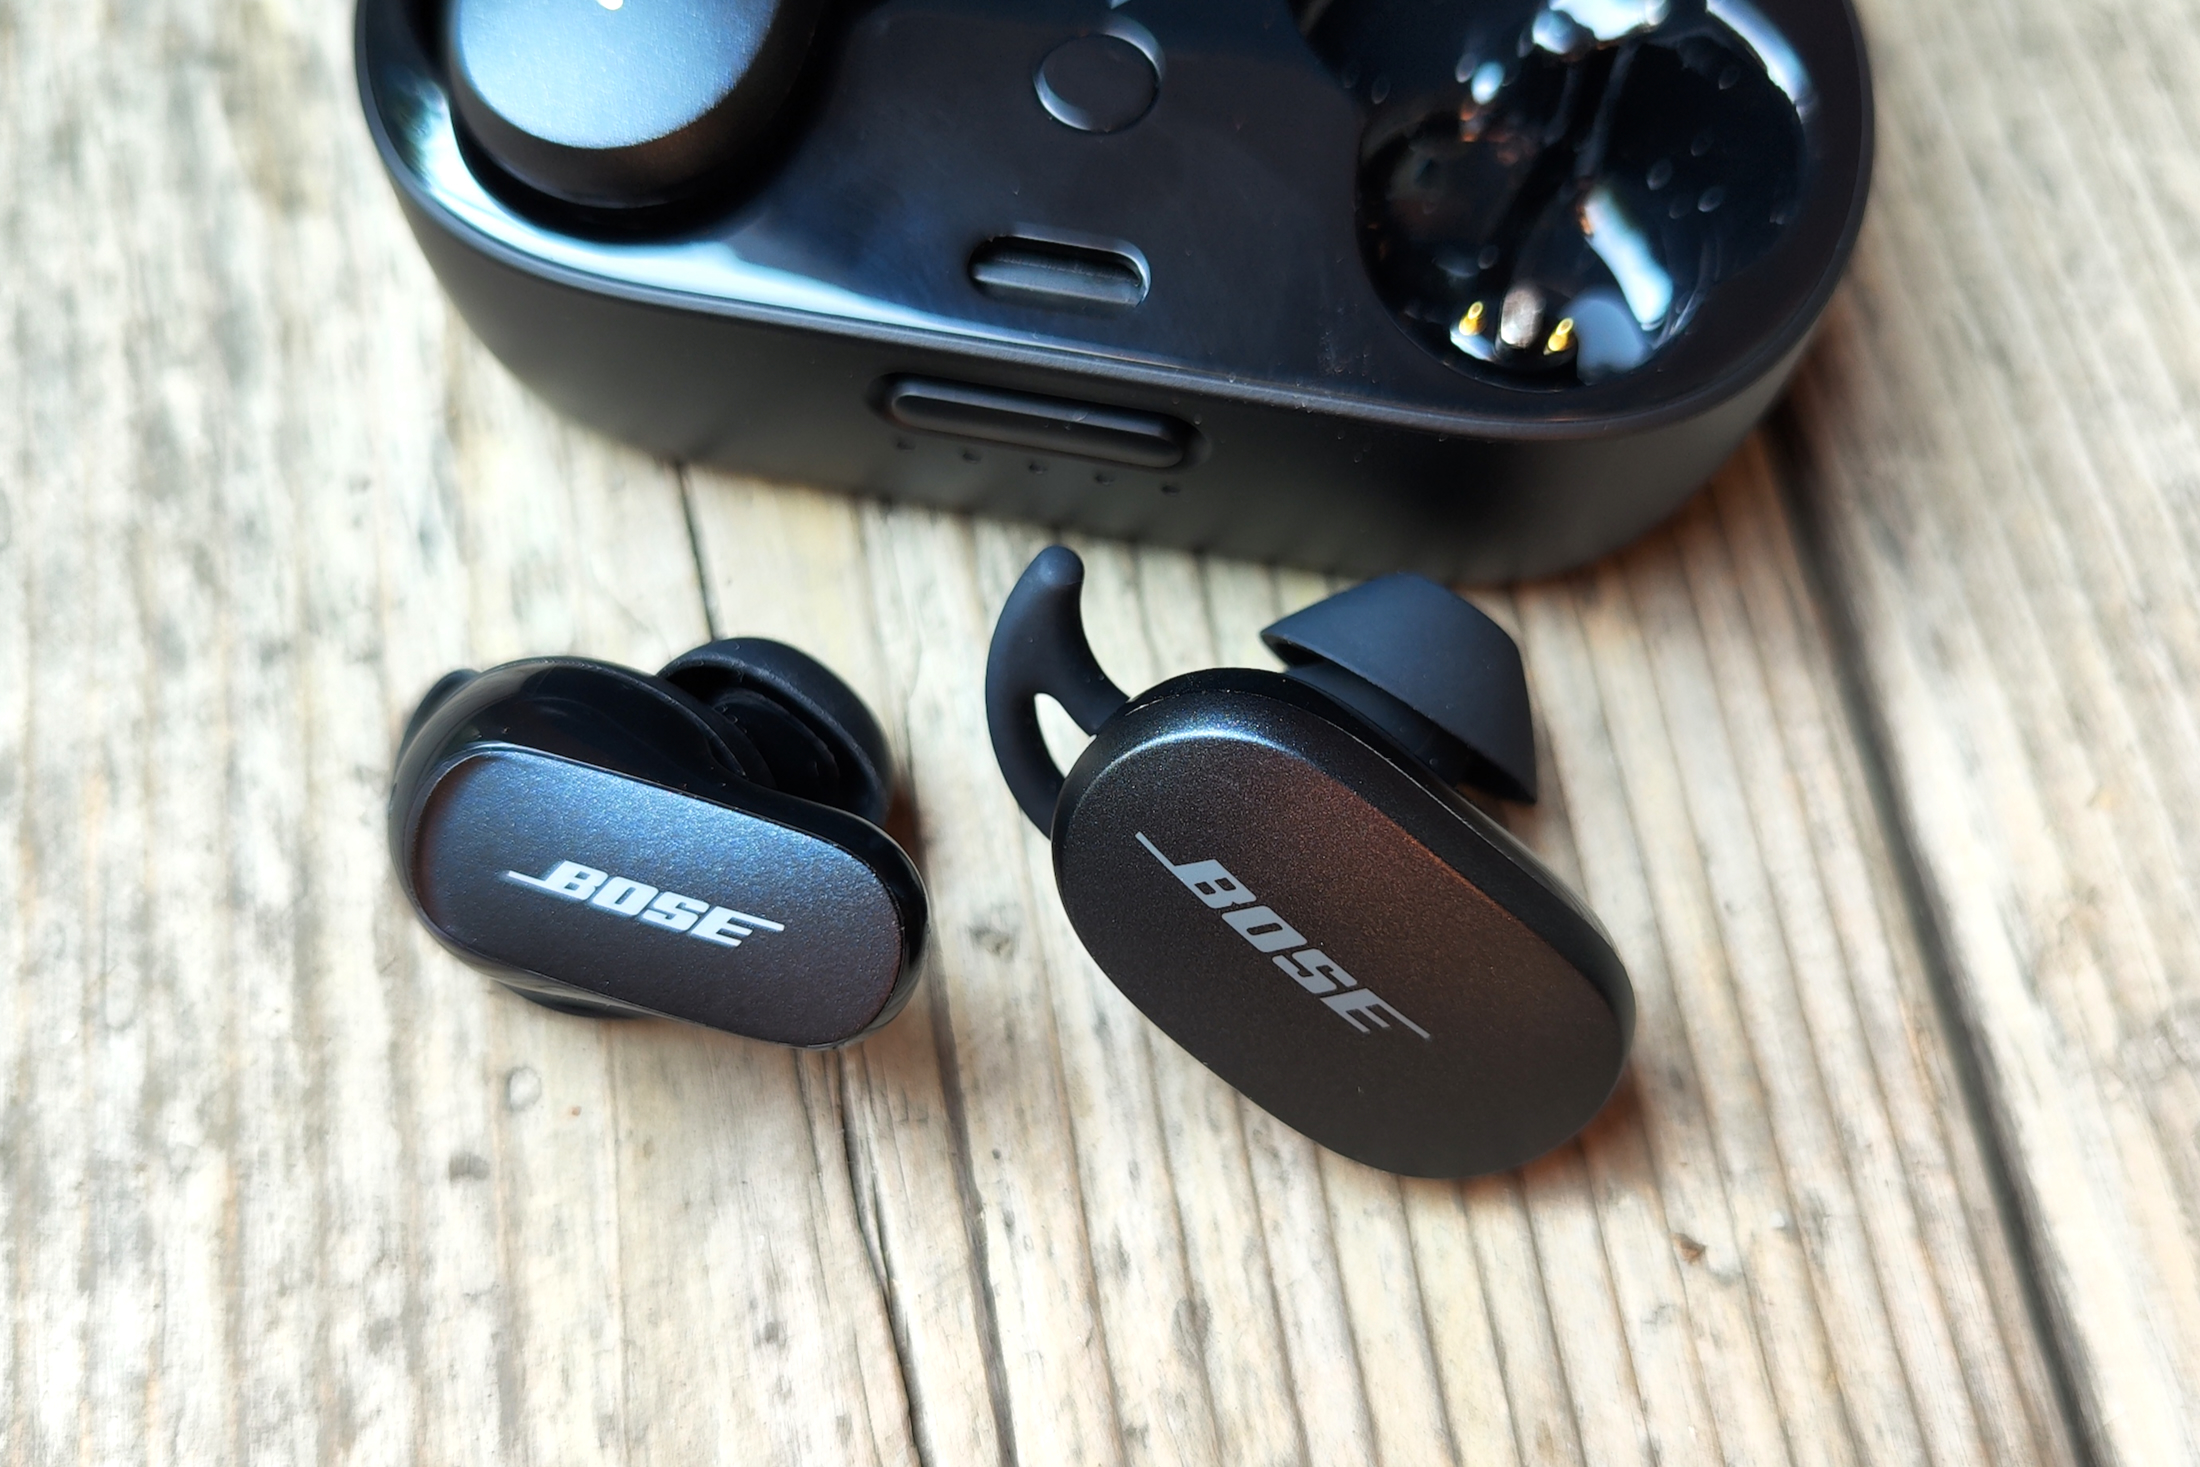 First and second-gen Bose QuietComfort Earbuds seen side-by-side.